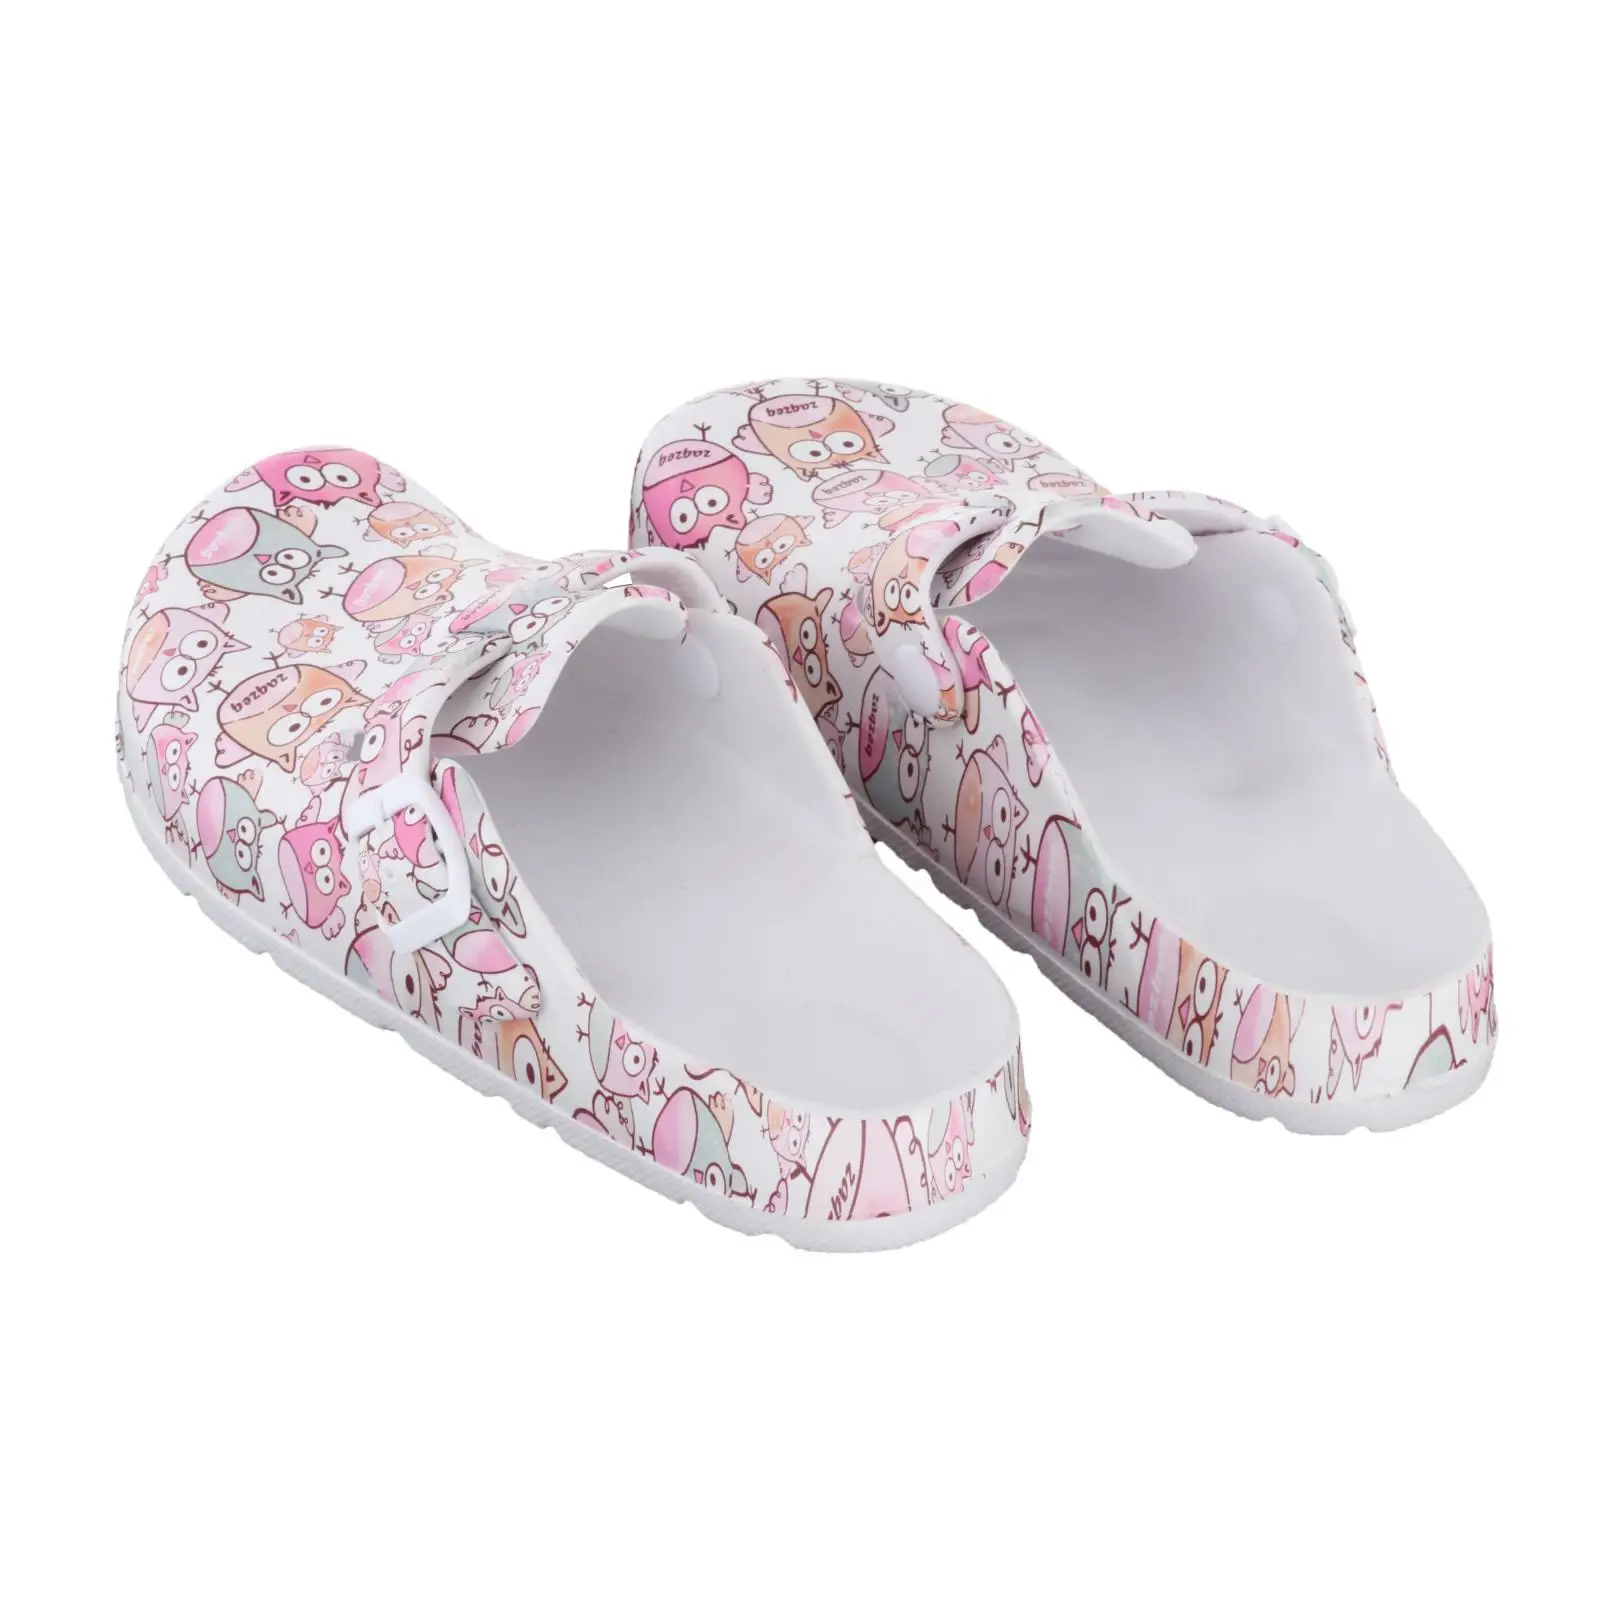 Slippers for Women Quick Drying, EVA Soft Slippers, Non-Slip Soft Shower Spa Bath Pool Gym House Sandals for Indoor & Outdoor